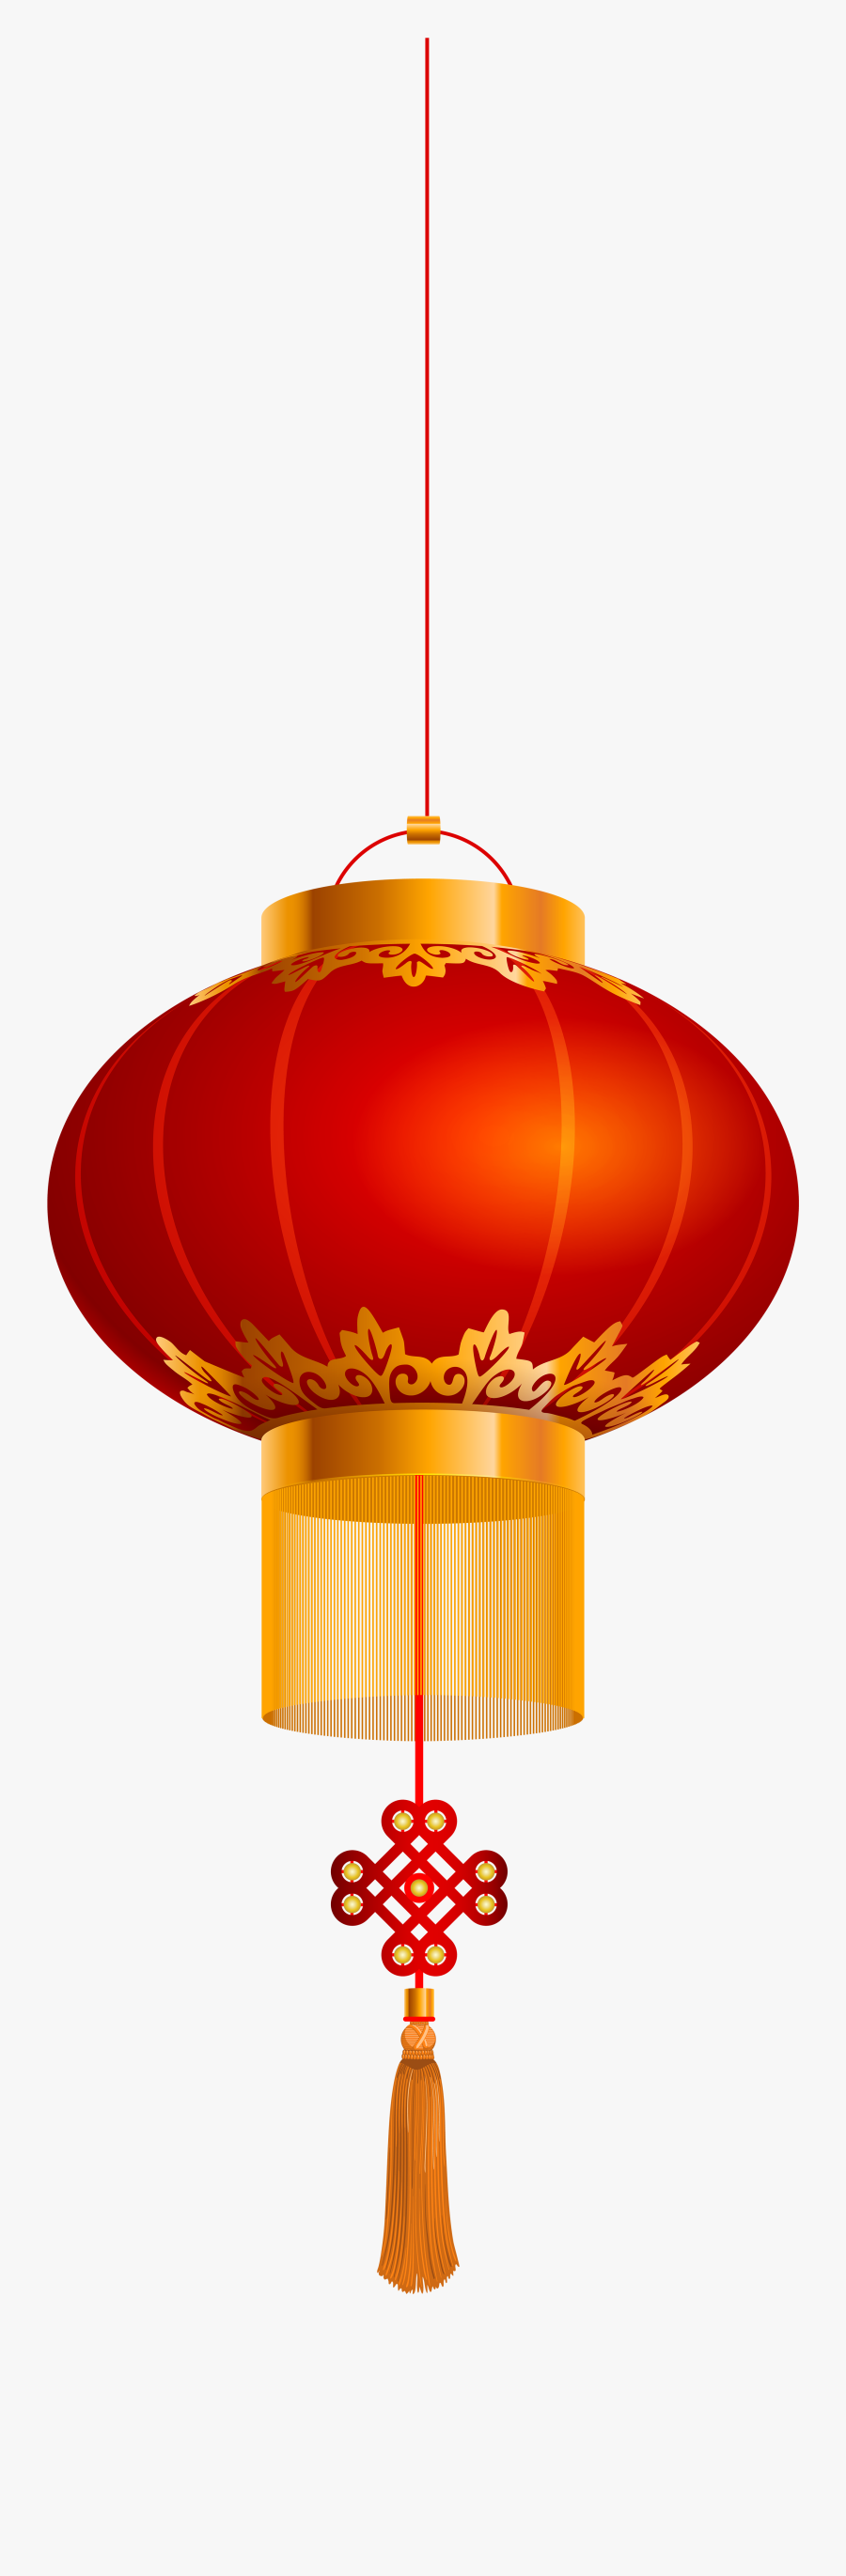 Chinese Lantern Clipart At Getdrawings - Chinese Lantern Png, Transparent Clipart